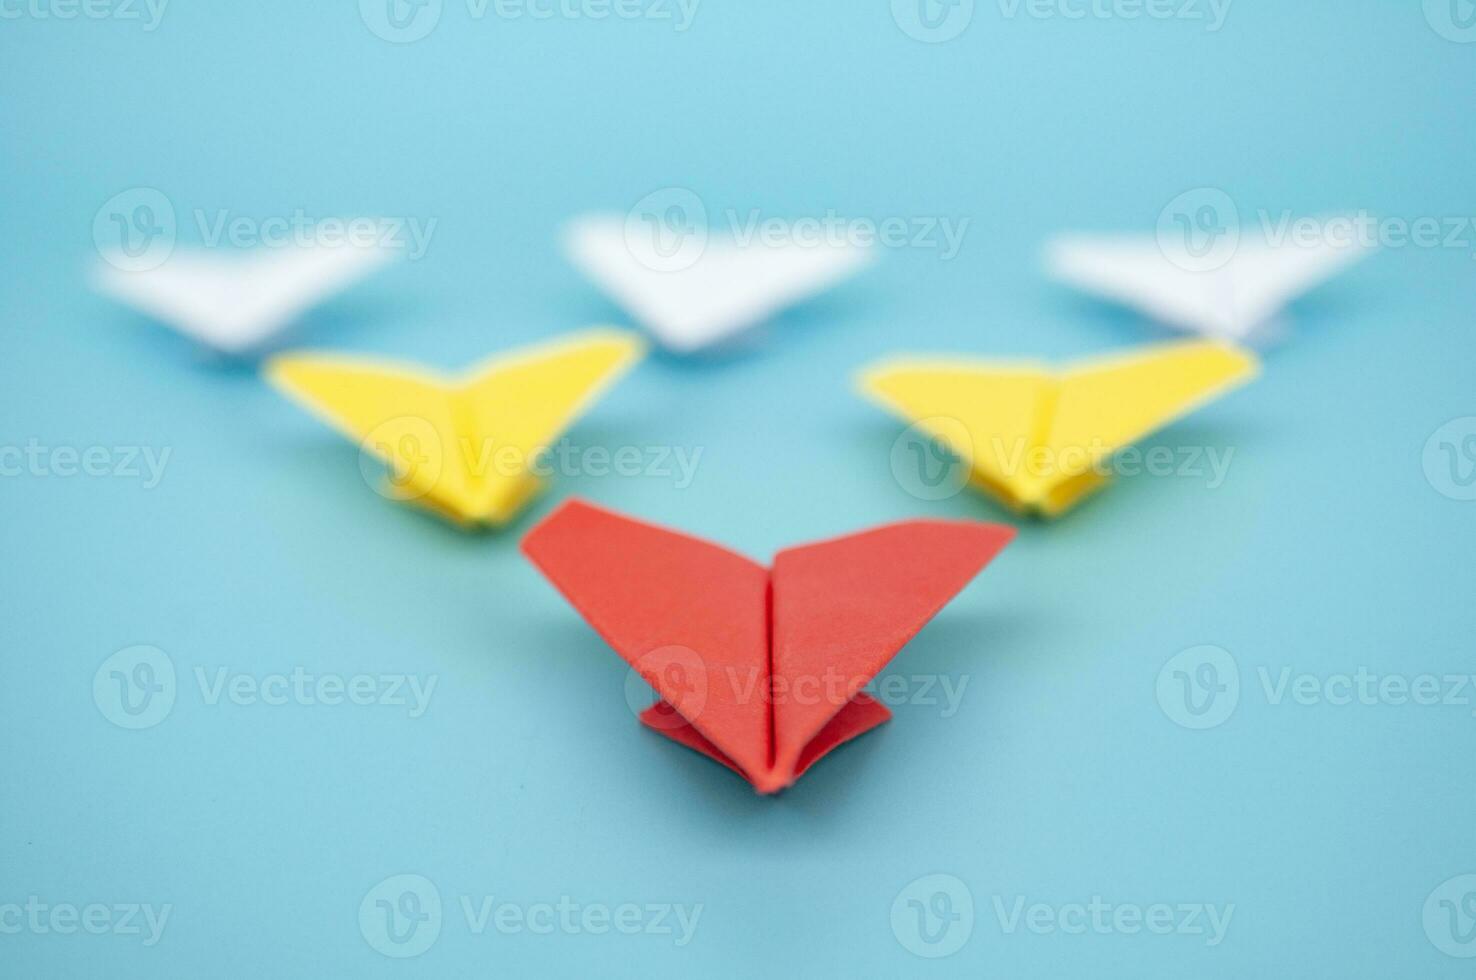 Close up view of red paper airplane origami leading yellow and white paper airplanes on blue cover background photo